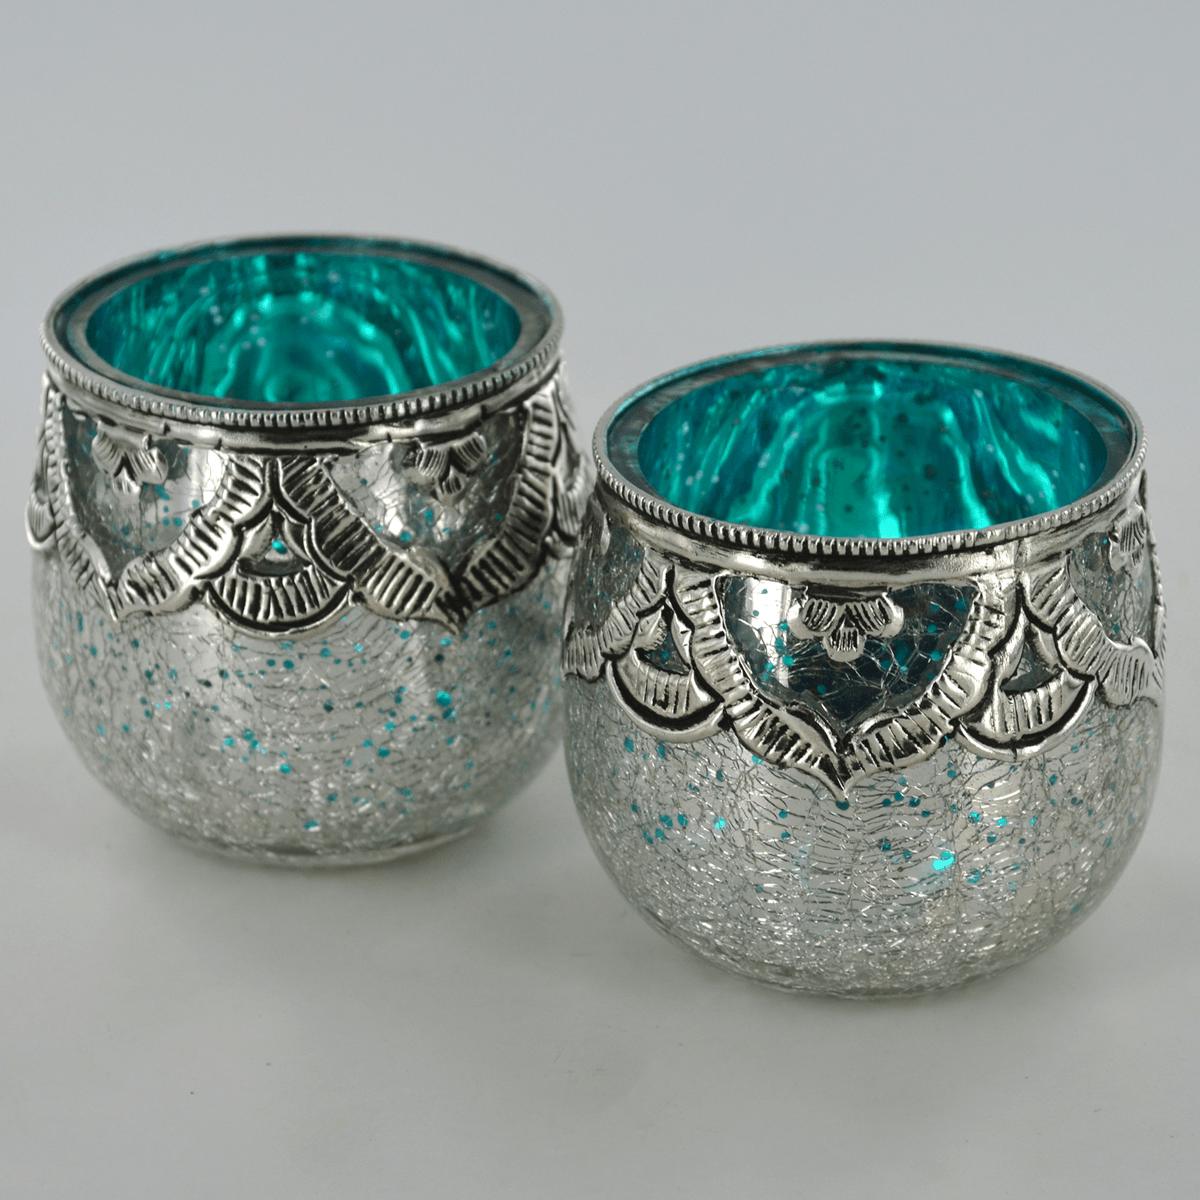 Handmade Turquoise Votive Tealight Candle Holders - Pair - TwoBeeps.co.uk